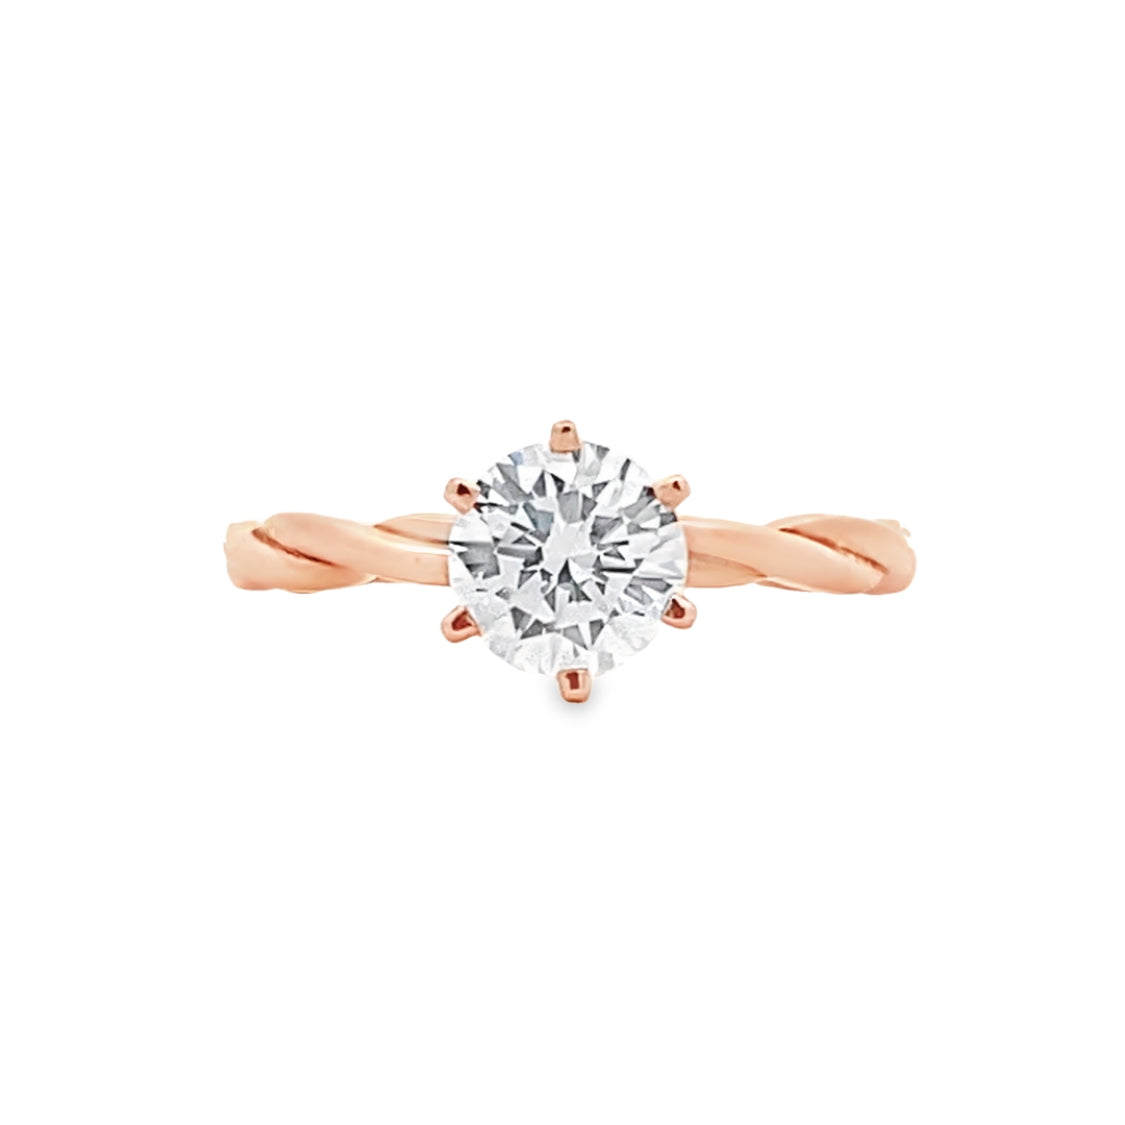 Beeghly & Co. 14 Karat Rose Gold Twist Solitaire Engagement Ring